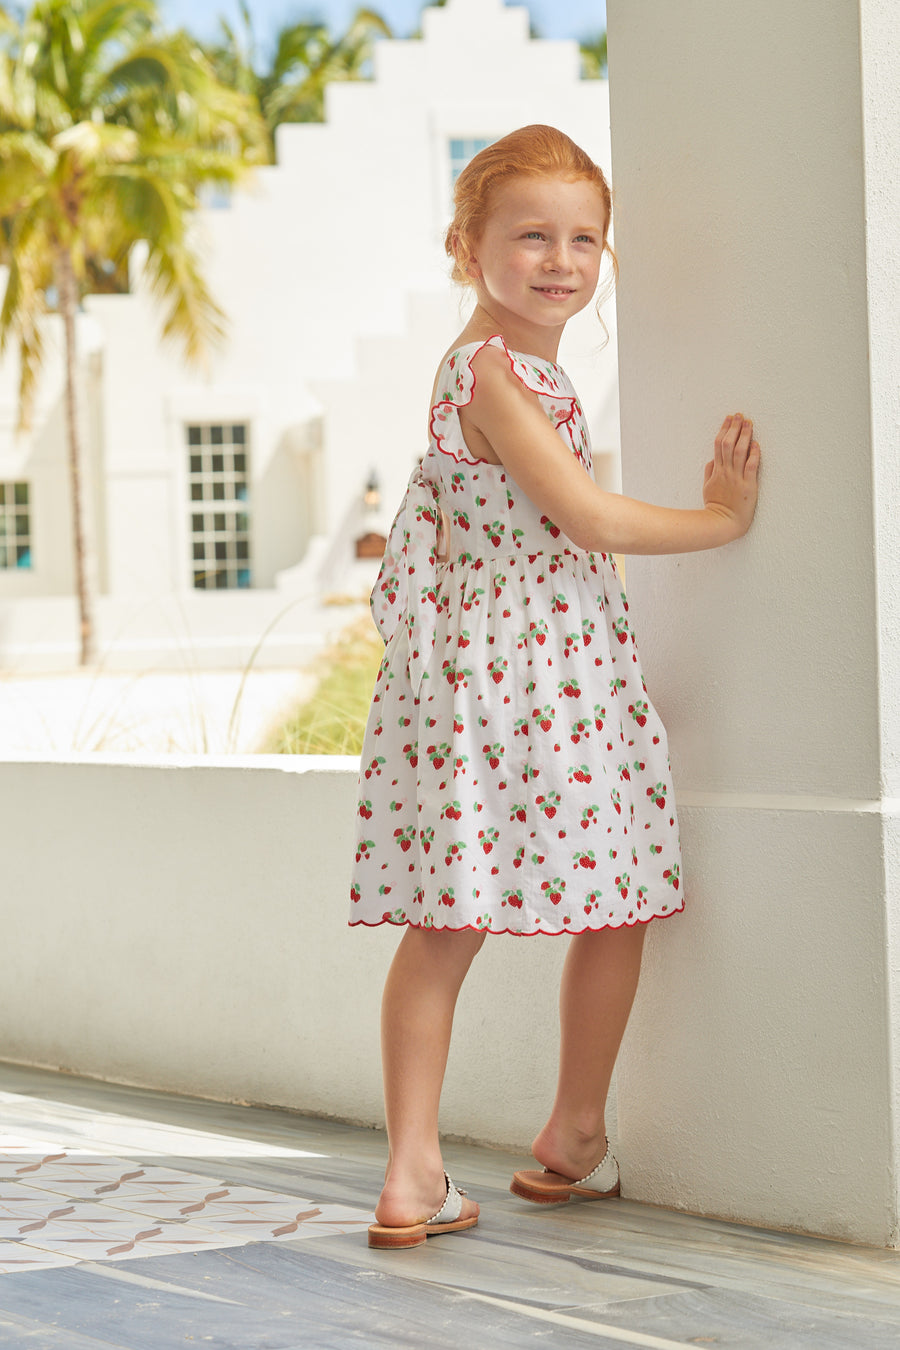 Little English traditional children’s clothing, girl's cotton dress in strawberry print with red piped ruffle sleeves for Spring